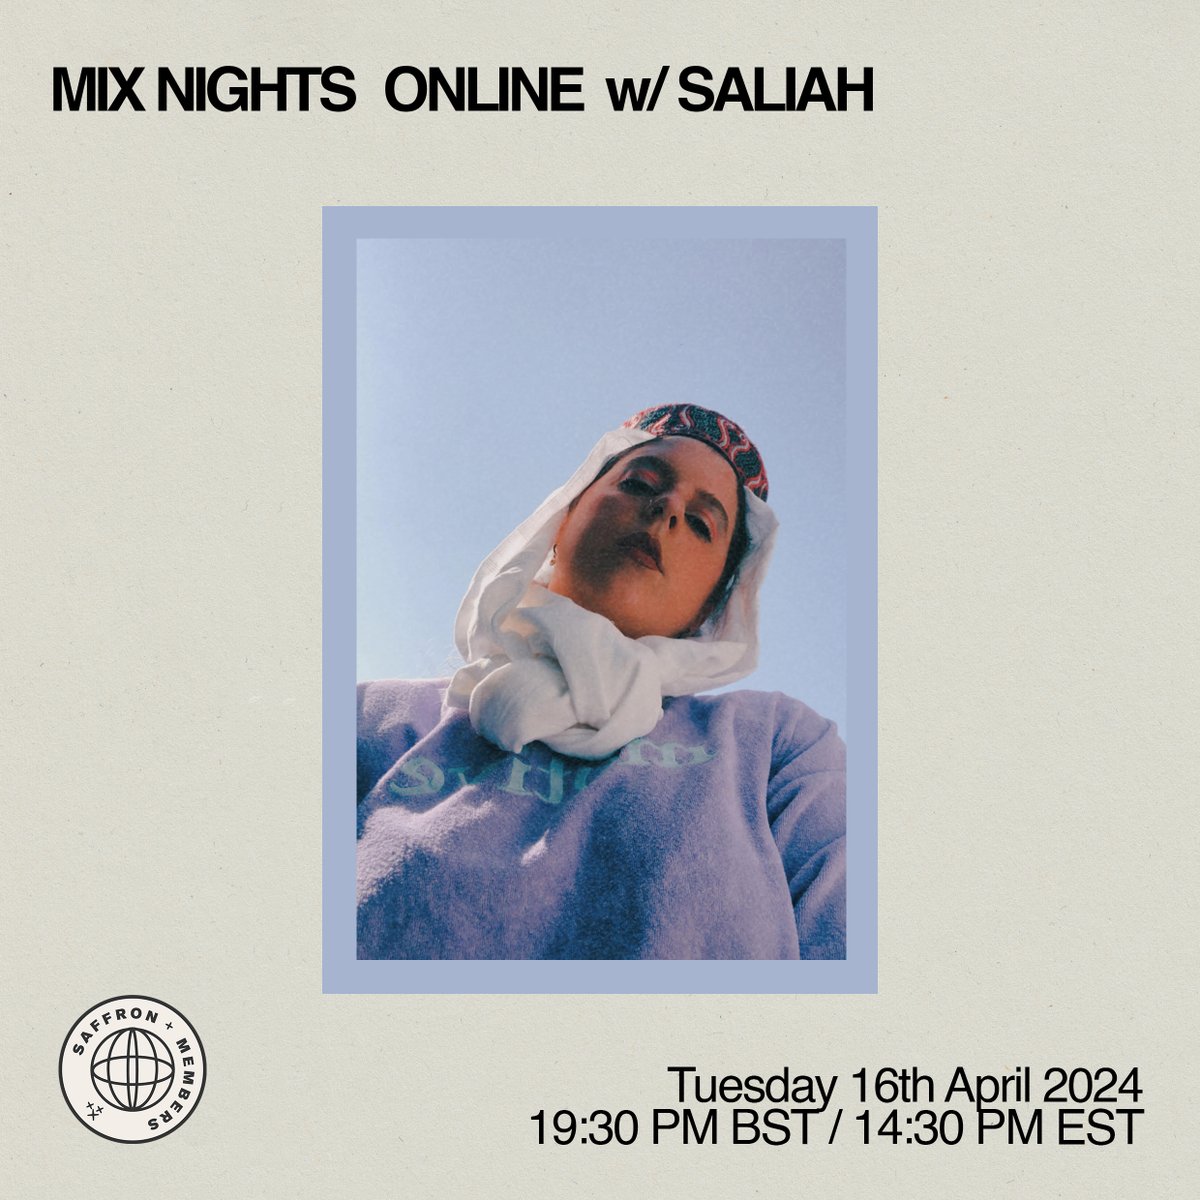 Yes, yes! @SaliahTweets steps up to host our April online workshop 💻 Join her to learn about into her approach to multi-genre mixing, with a focus on Arabic music 🌍 For women and NB people worldwide 🎟️Free for @saffronrecords members 🔗 Full info: tinyurl.com/3ks7ucbj